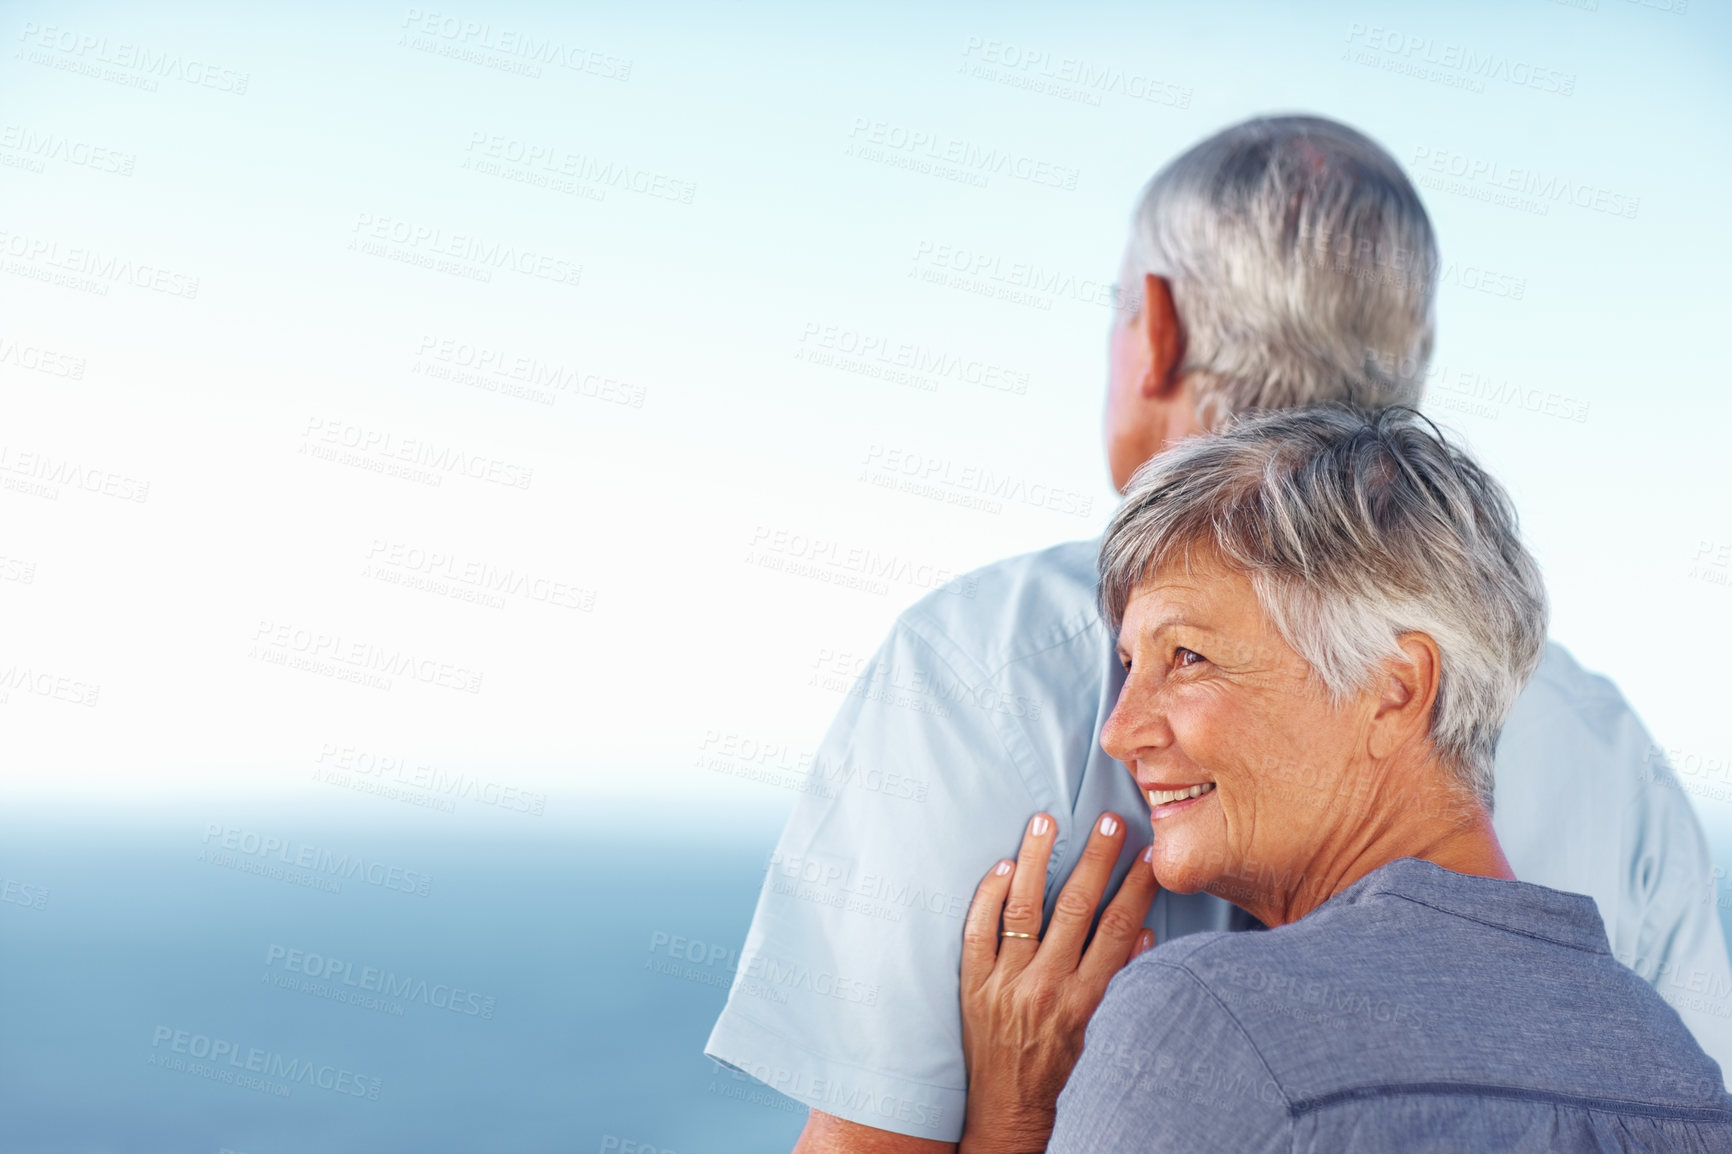 Buy stock photo Smiling mature woman and man enjoying time together outdoors